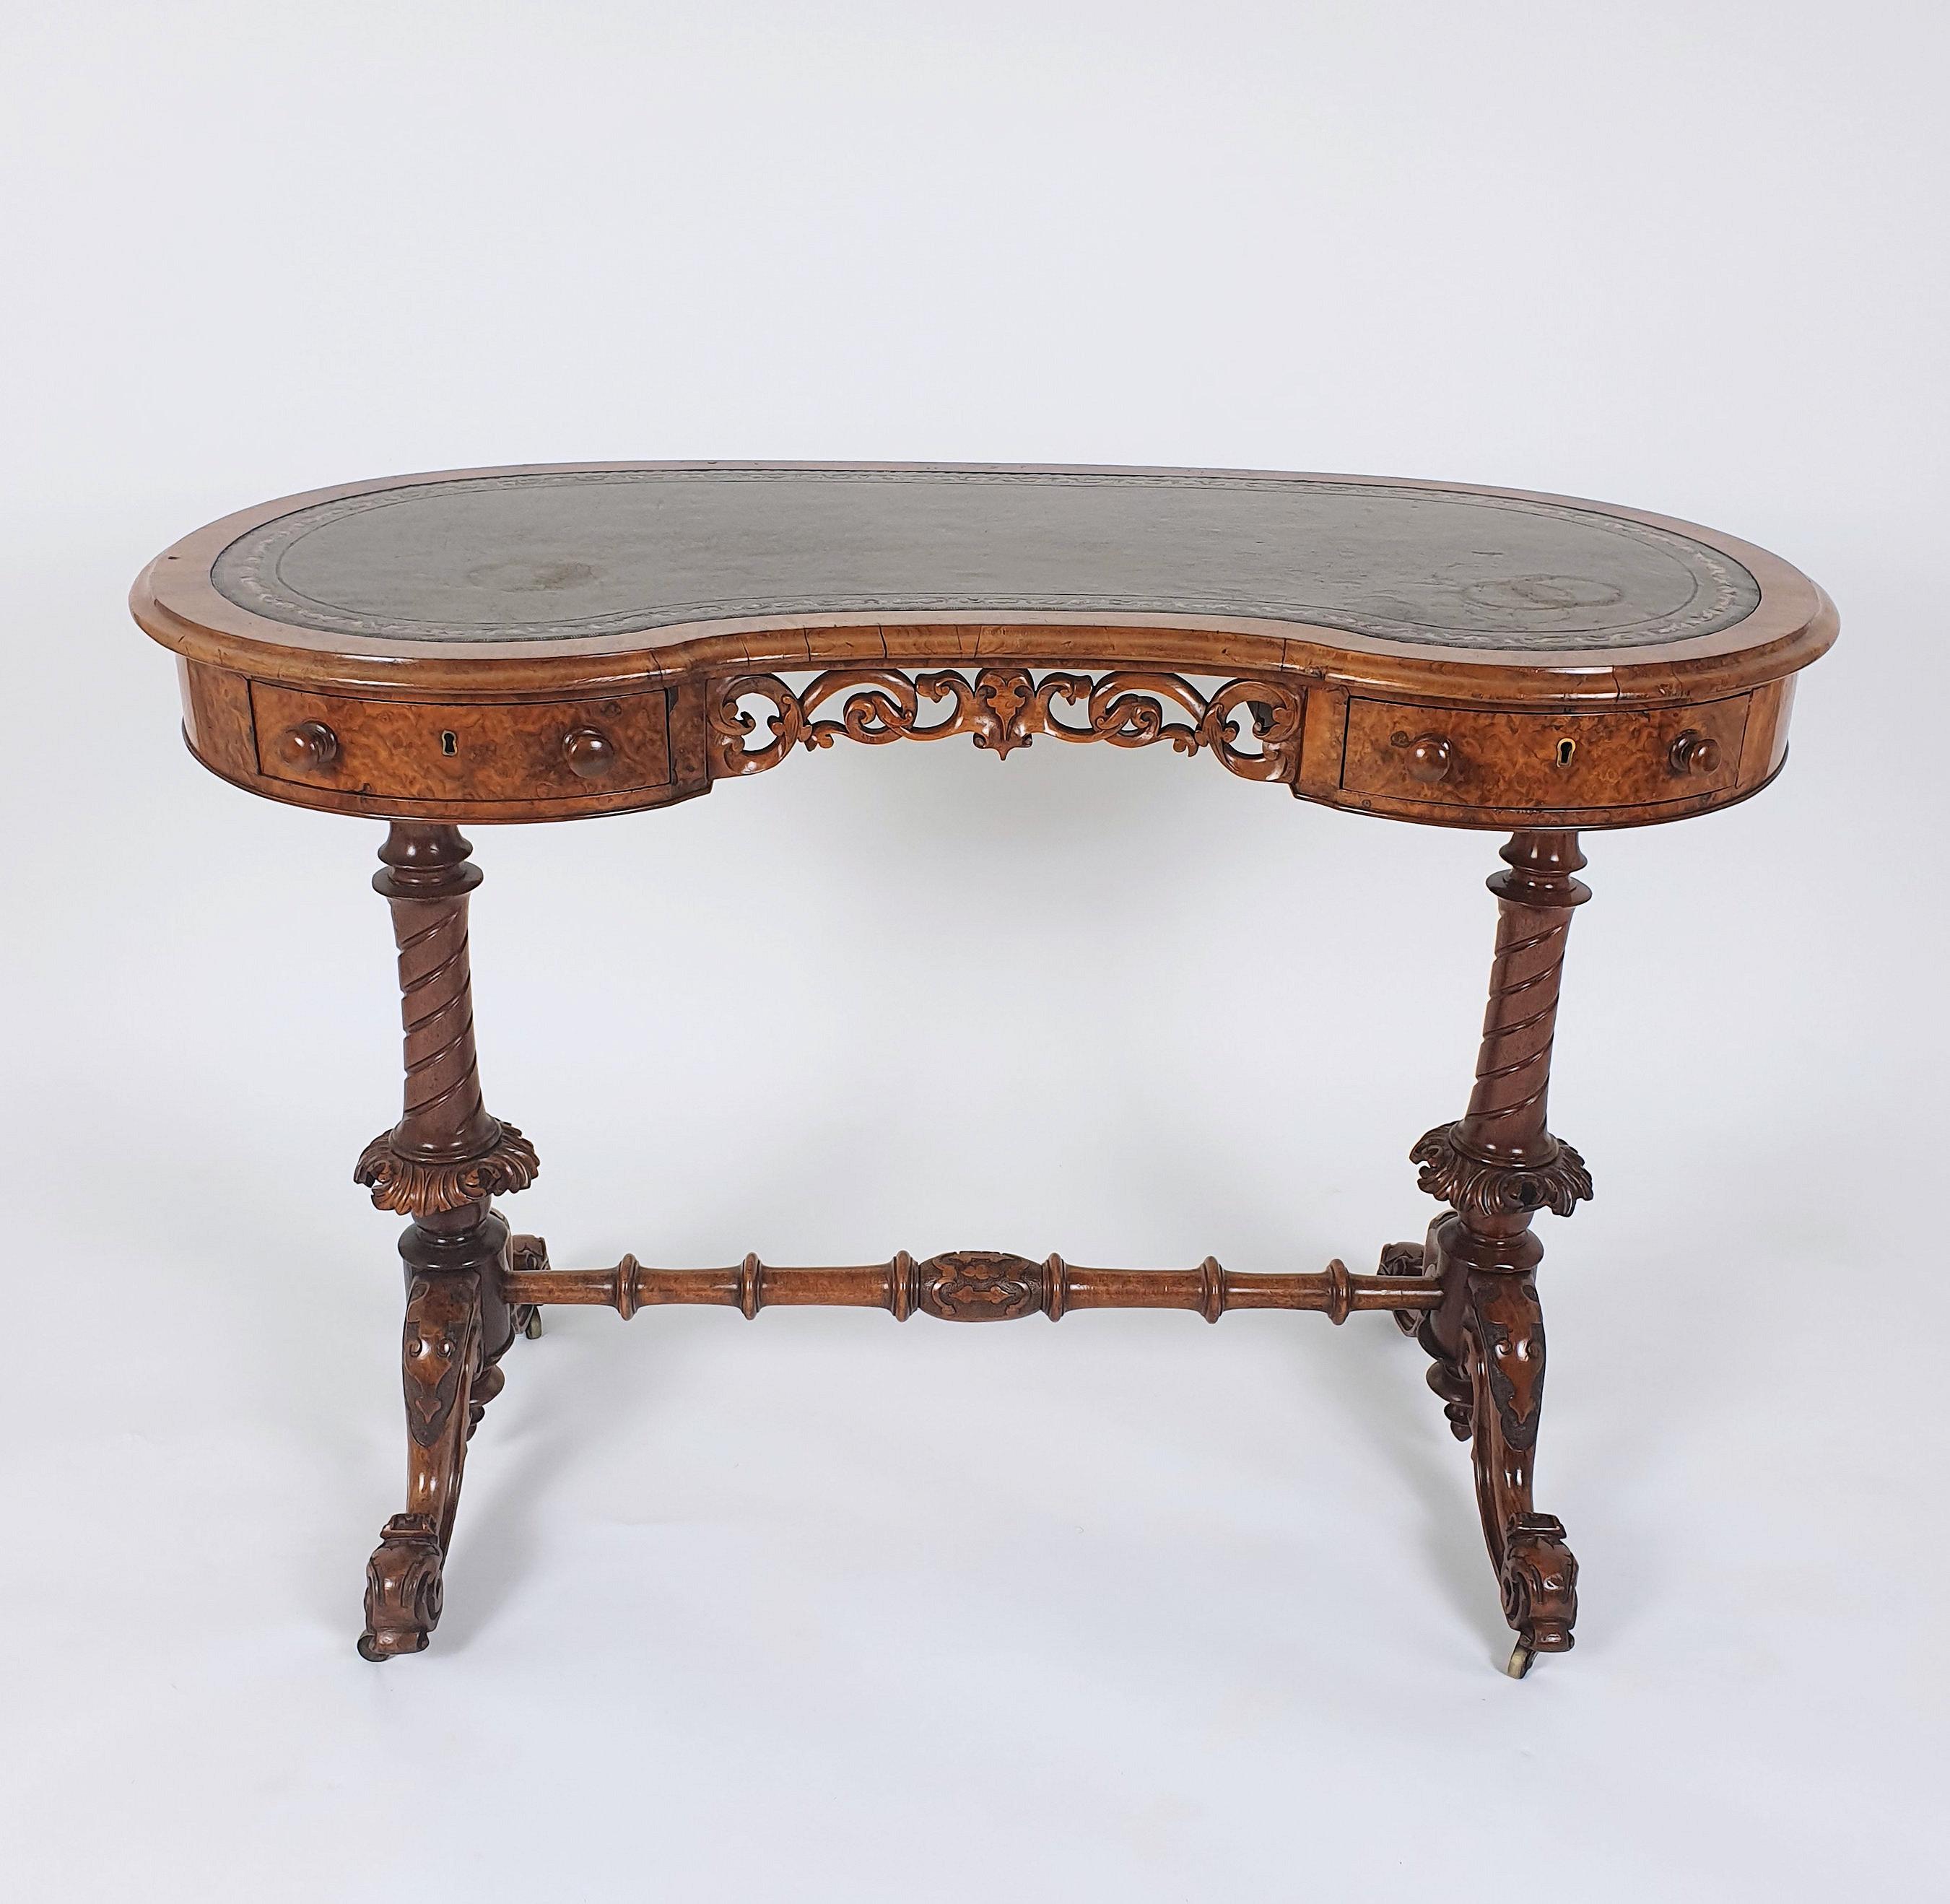 This exceptional early 19th century burr walnut ladies writing table features a kidney shaped top with the original leather inset and castors. The table has an ornately carved central knee hole flanked by 2 drawers with twin spiral turned supports